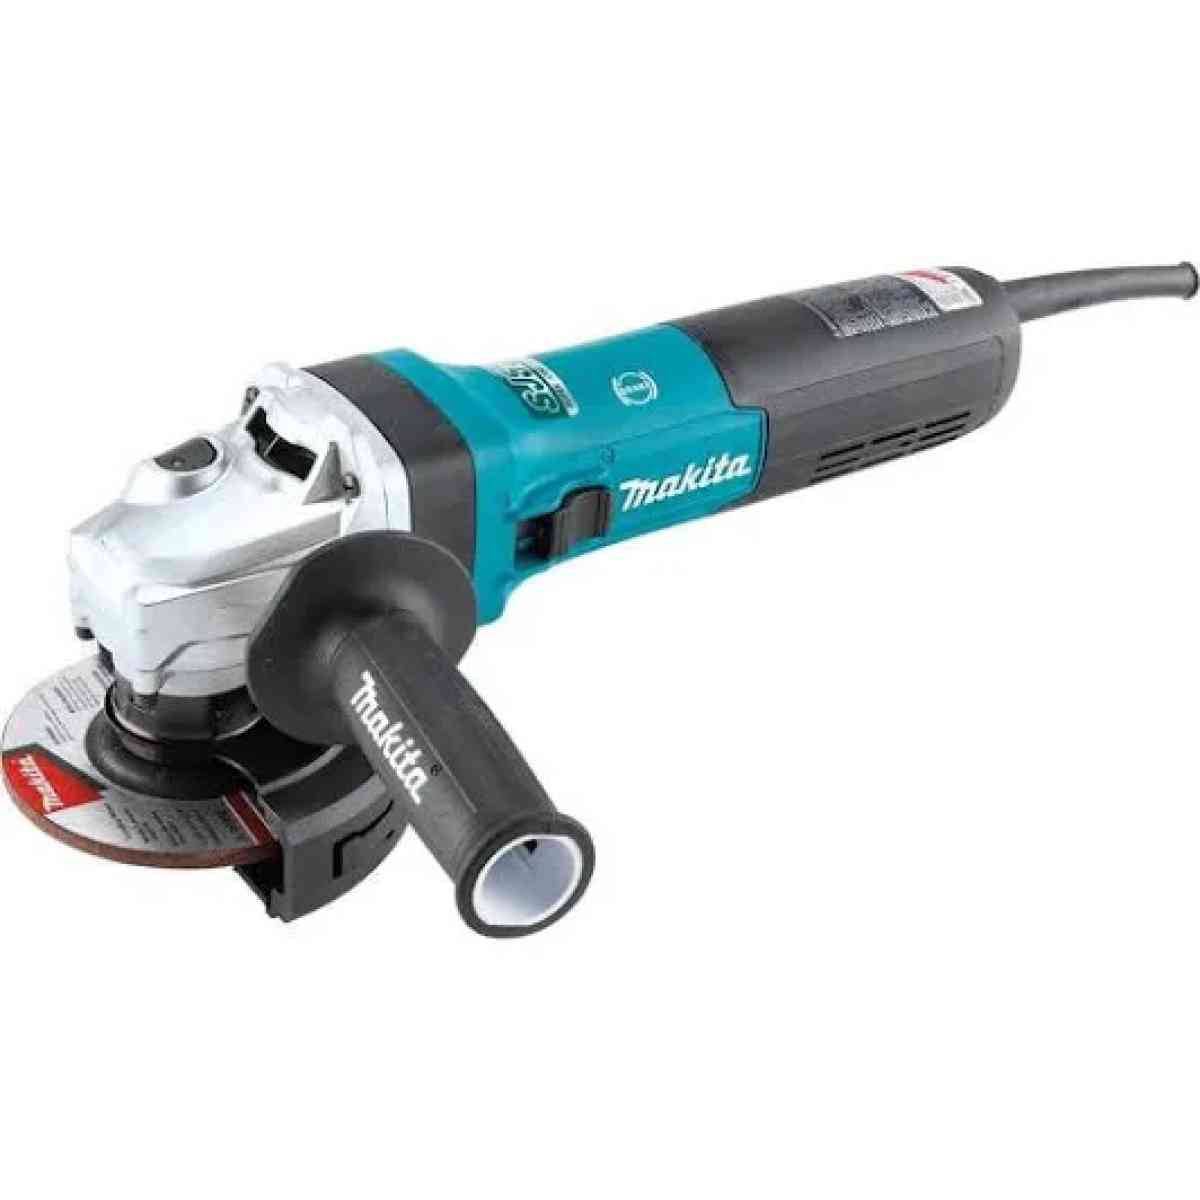 Makita 412 in Corded Angle Grinder